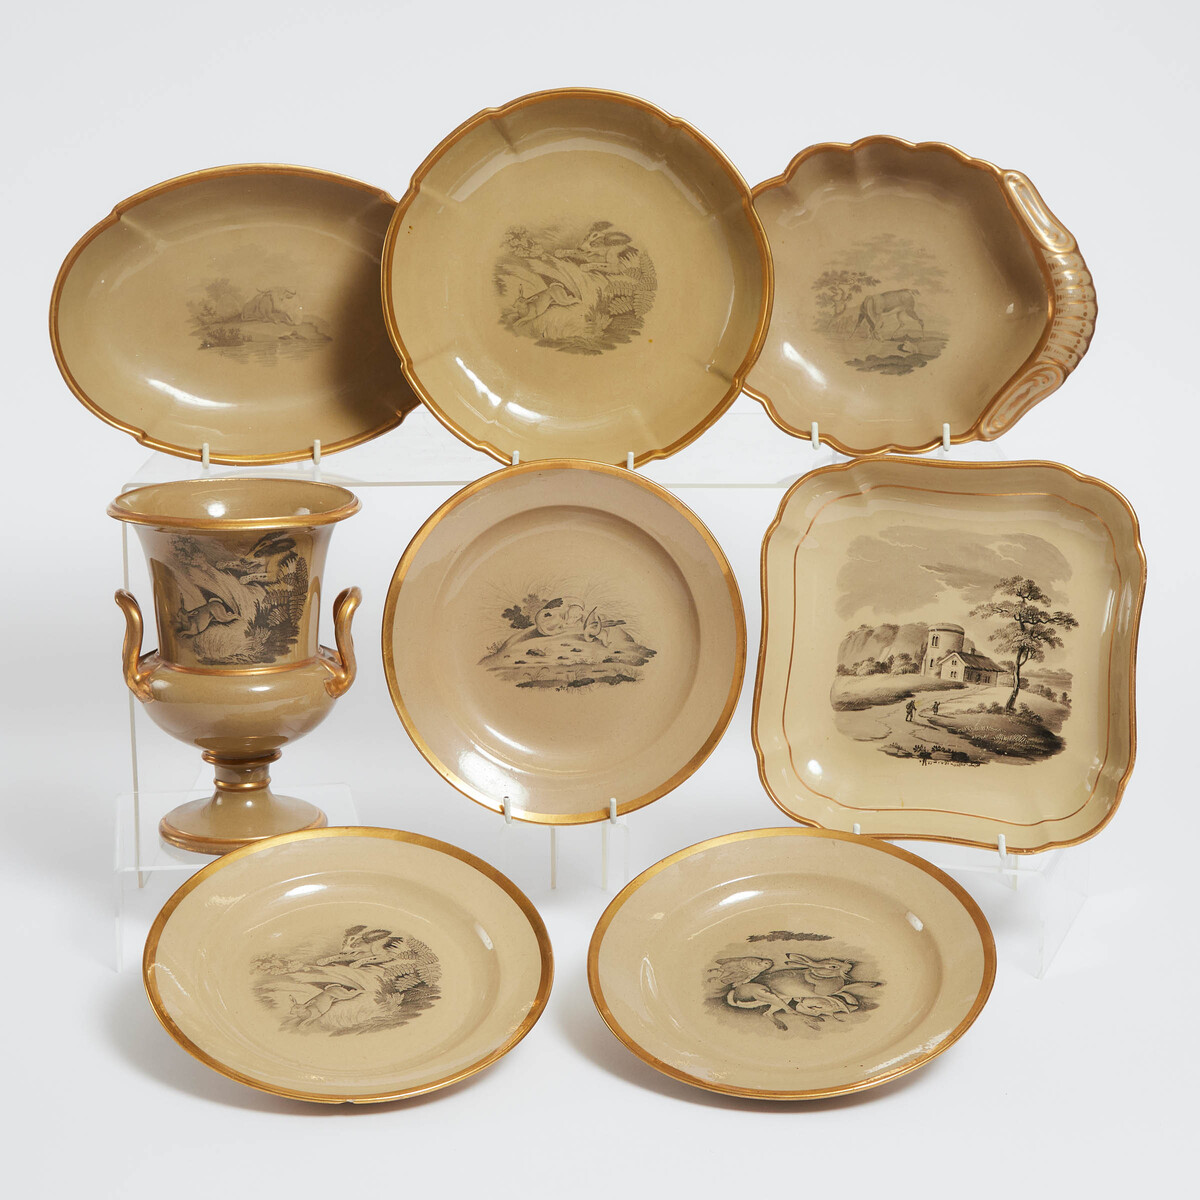 Spode Bat-Printed Drabware Two-Handled Vase, Four Serving Dishes, and Three Plates, early 19th centu